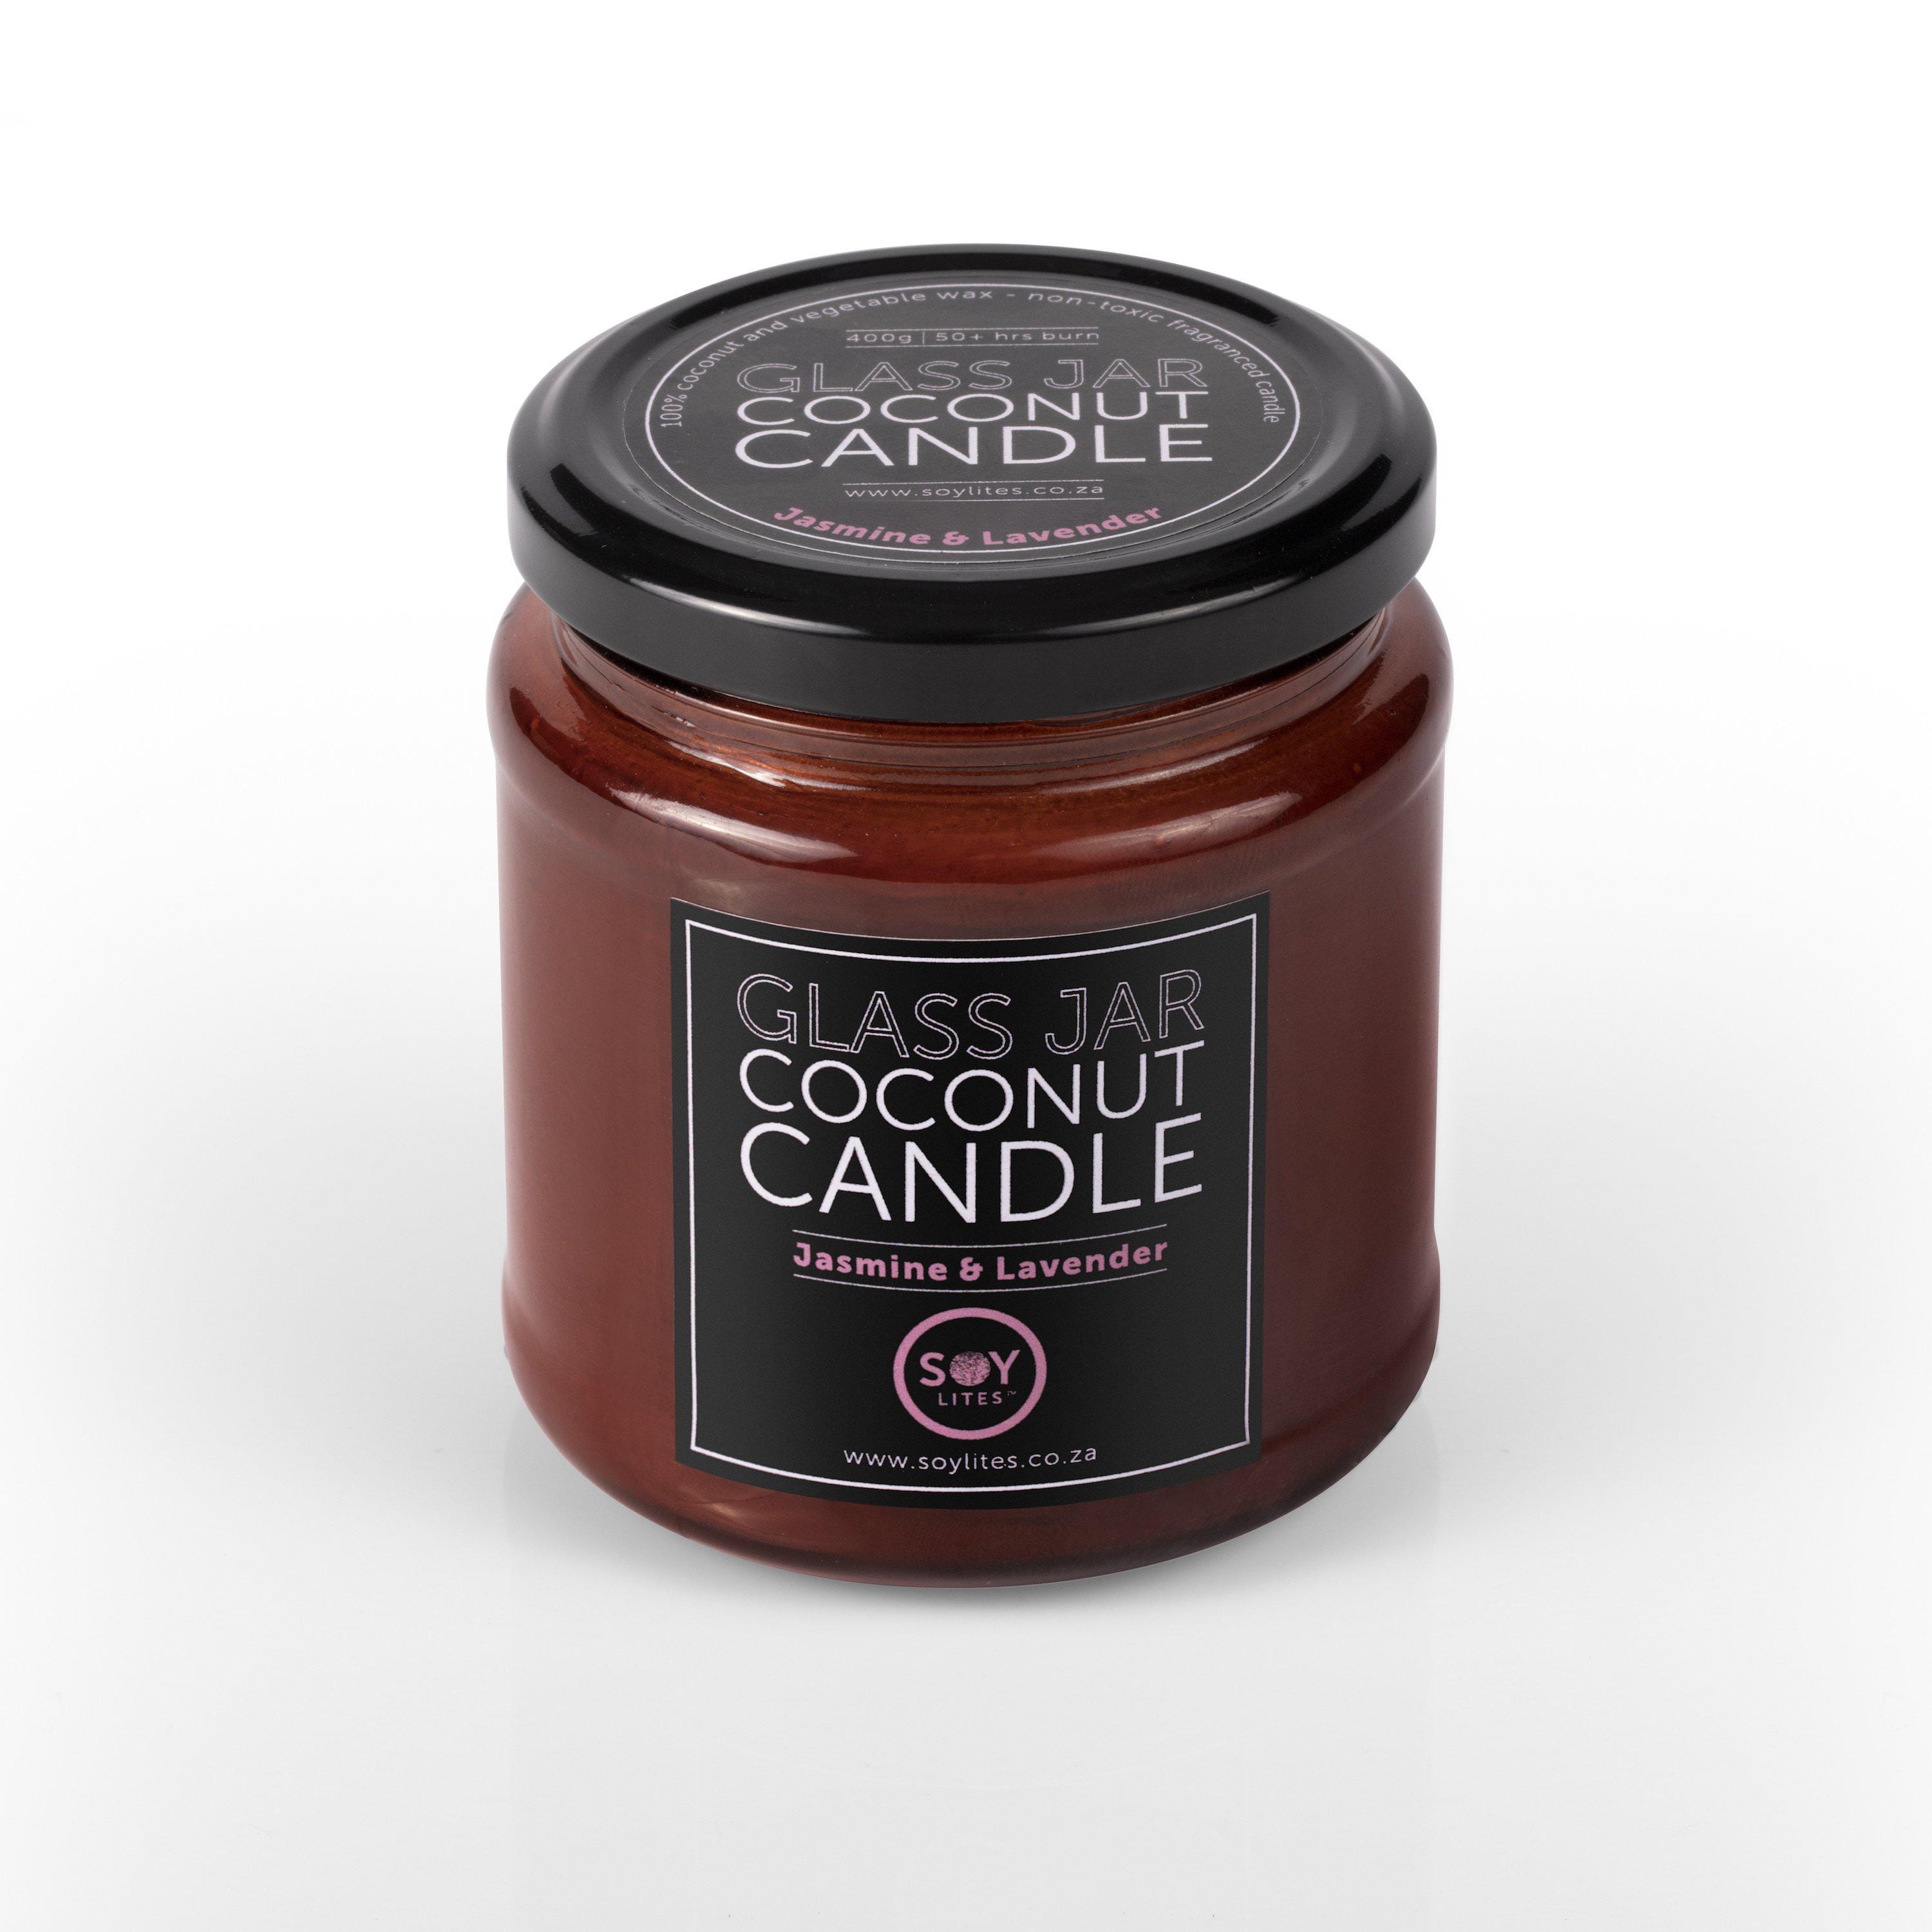 Coconut Candle with Jasmine & Lavender 200ml